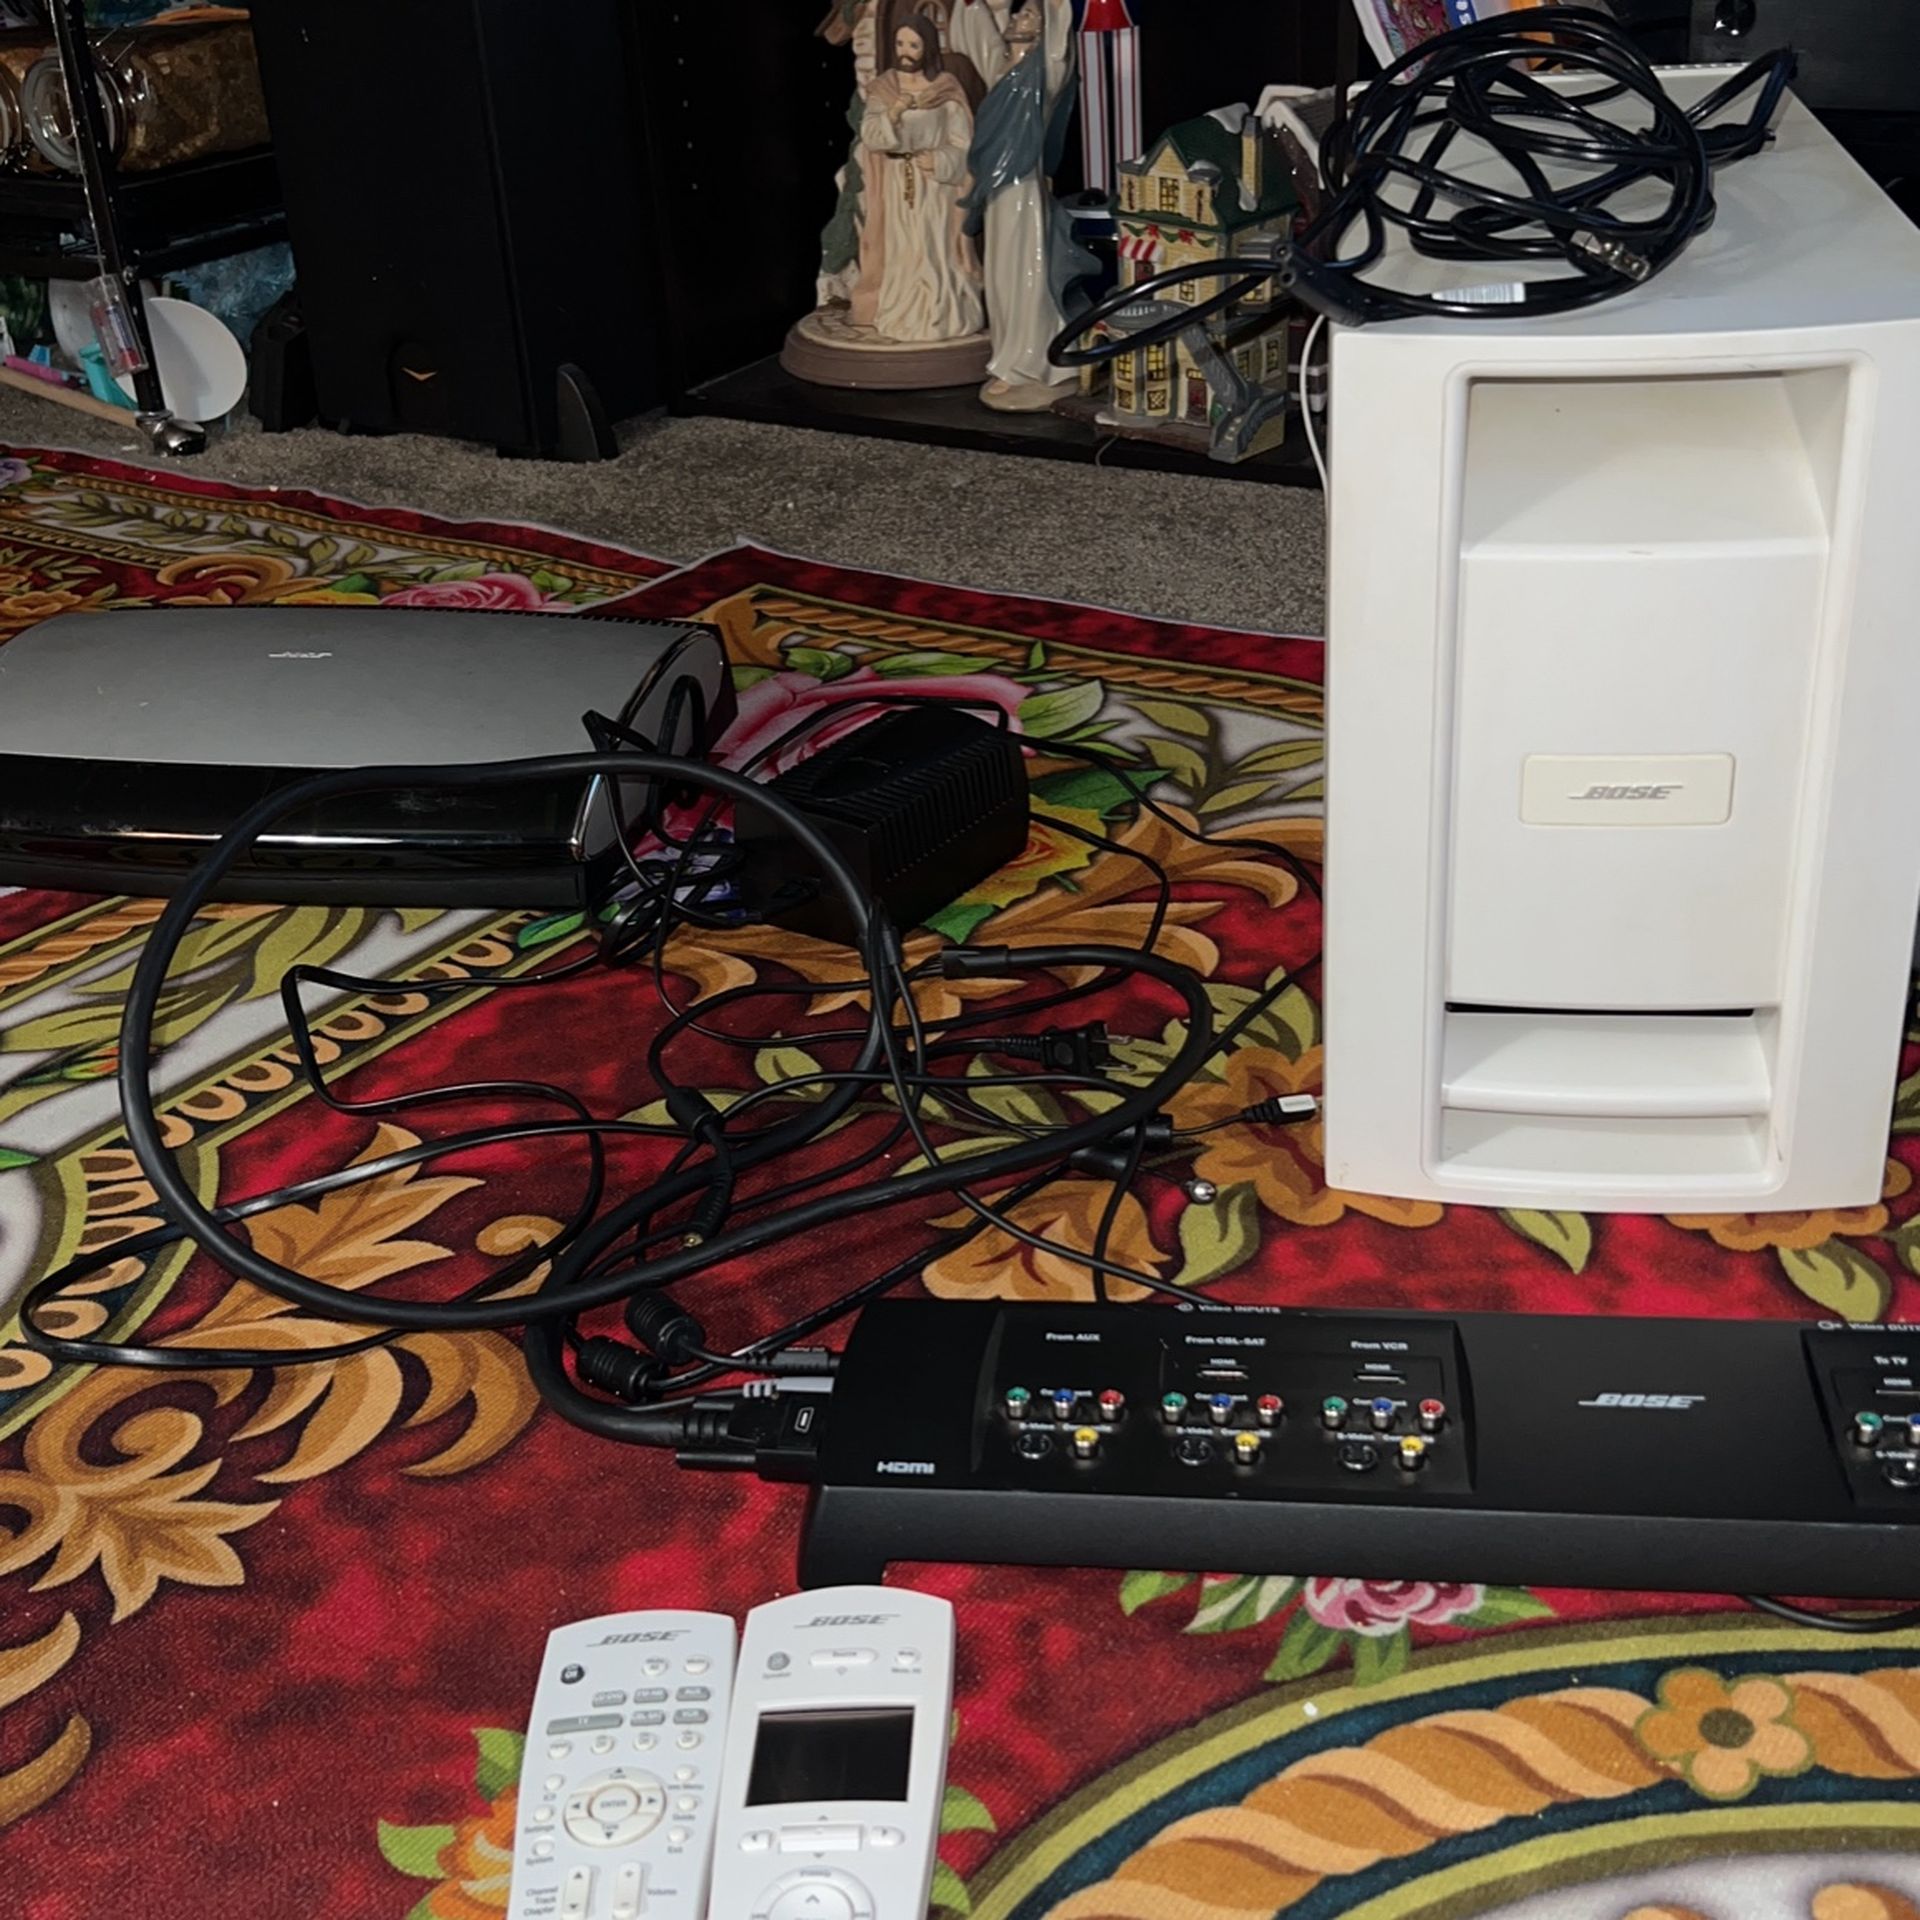 Bose Av48/ Will Work With Bose Upgraded System